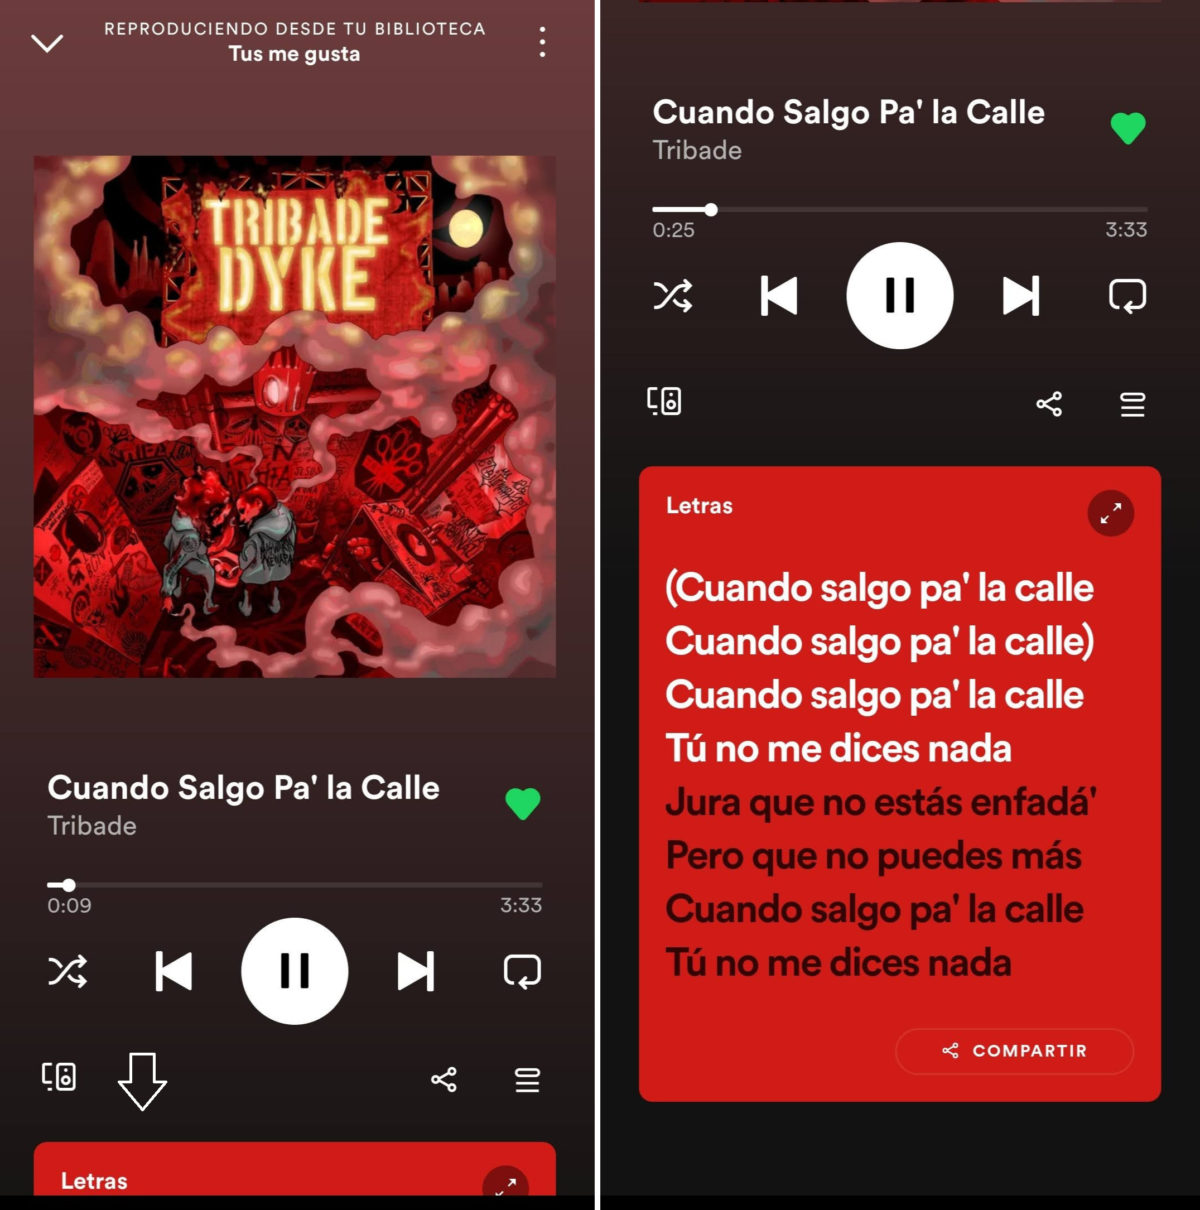 how to make the lyrics of the song appear in Spotify